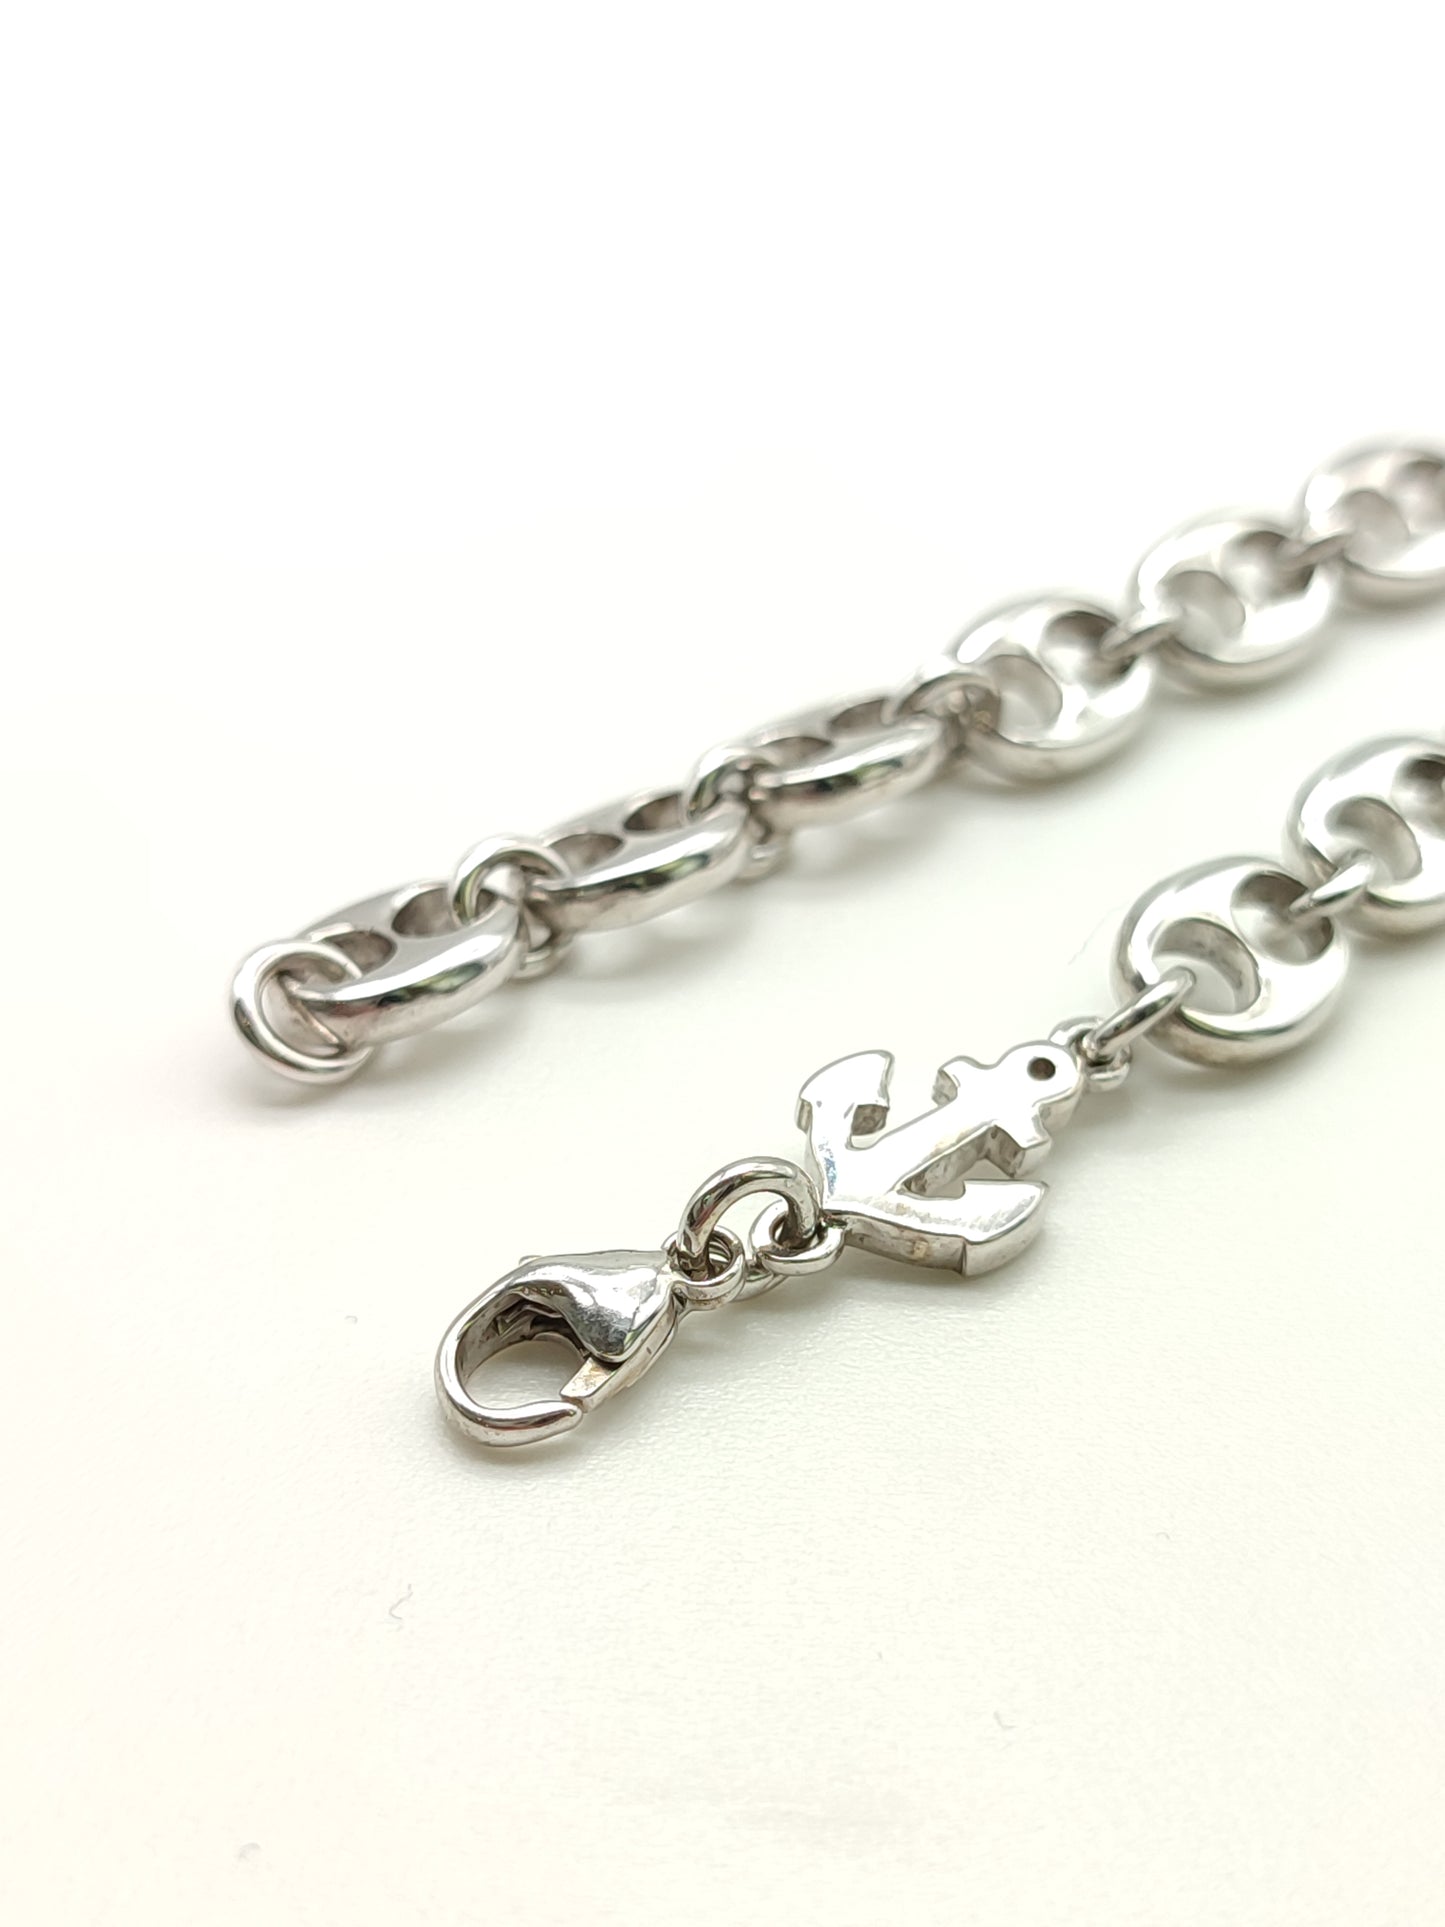 Silver bracelet with anchor